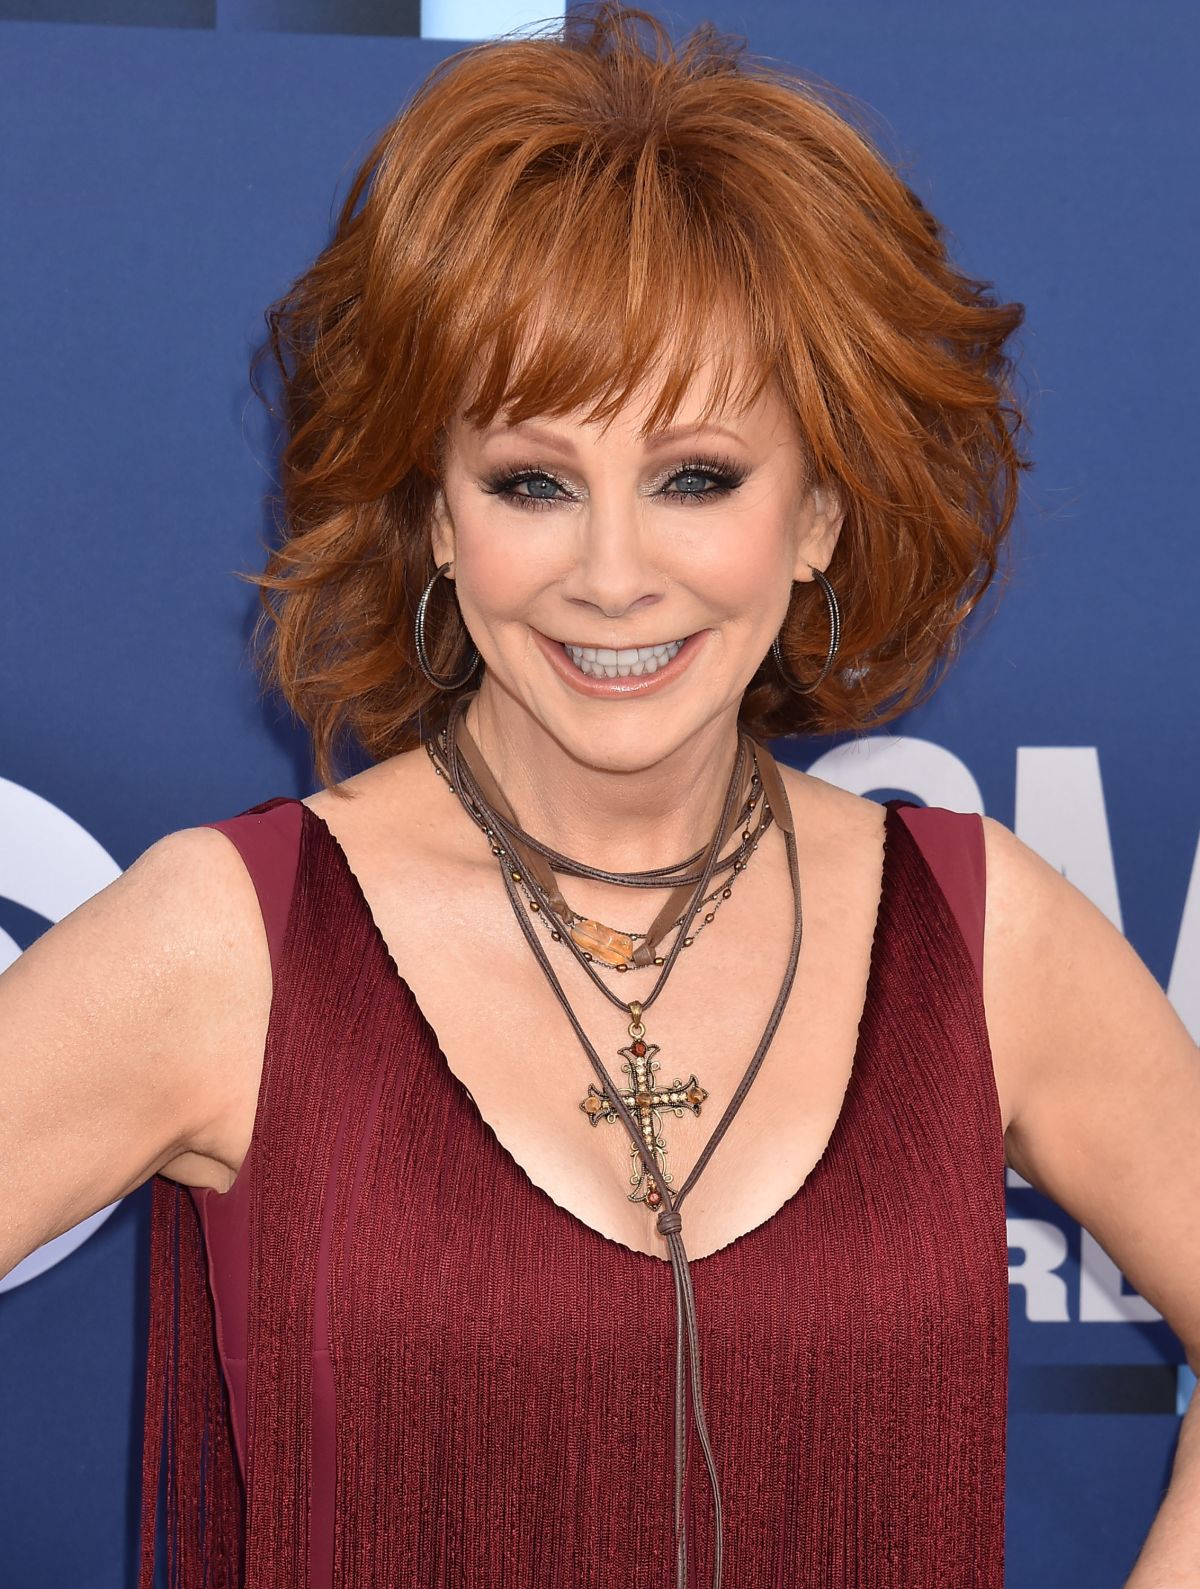 reba-mcentire-at-2019-academy-of-country-music-awards-in-las-vegas-04